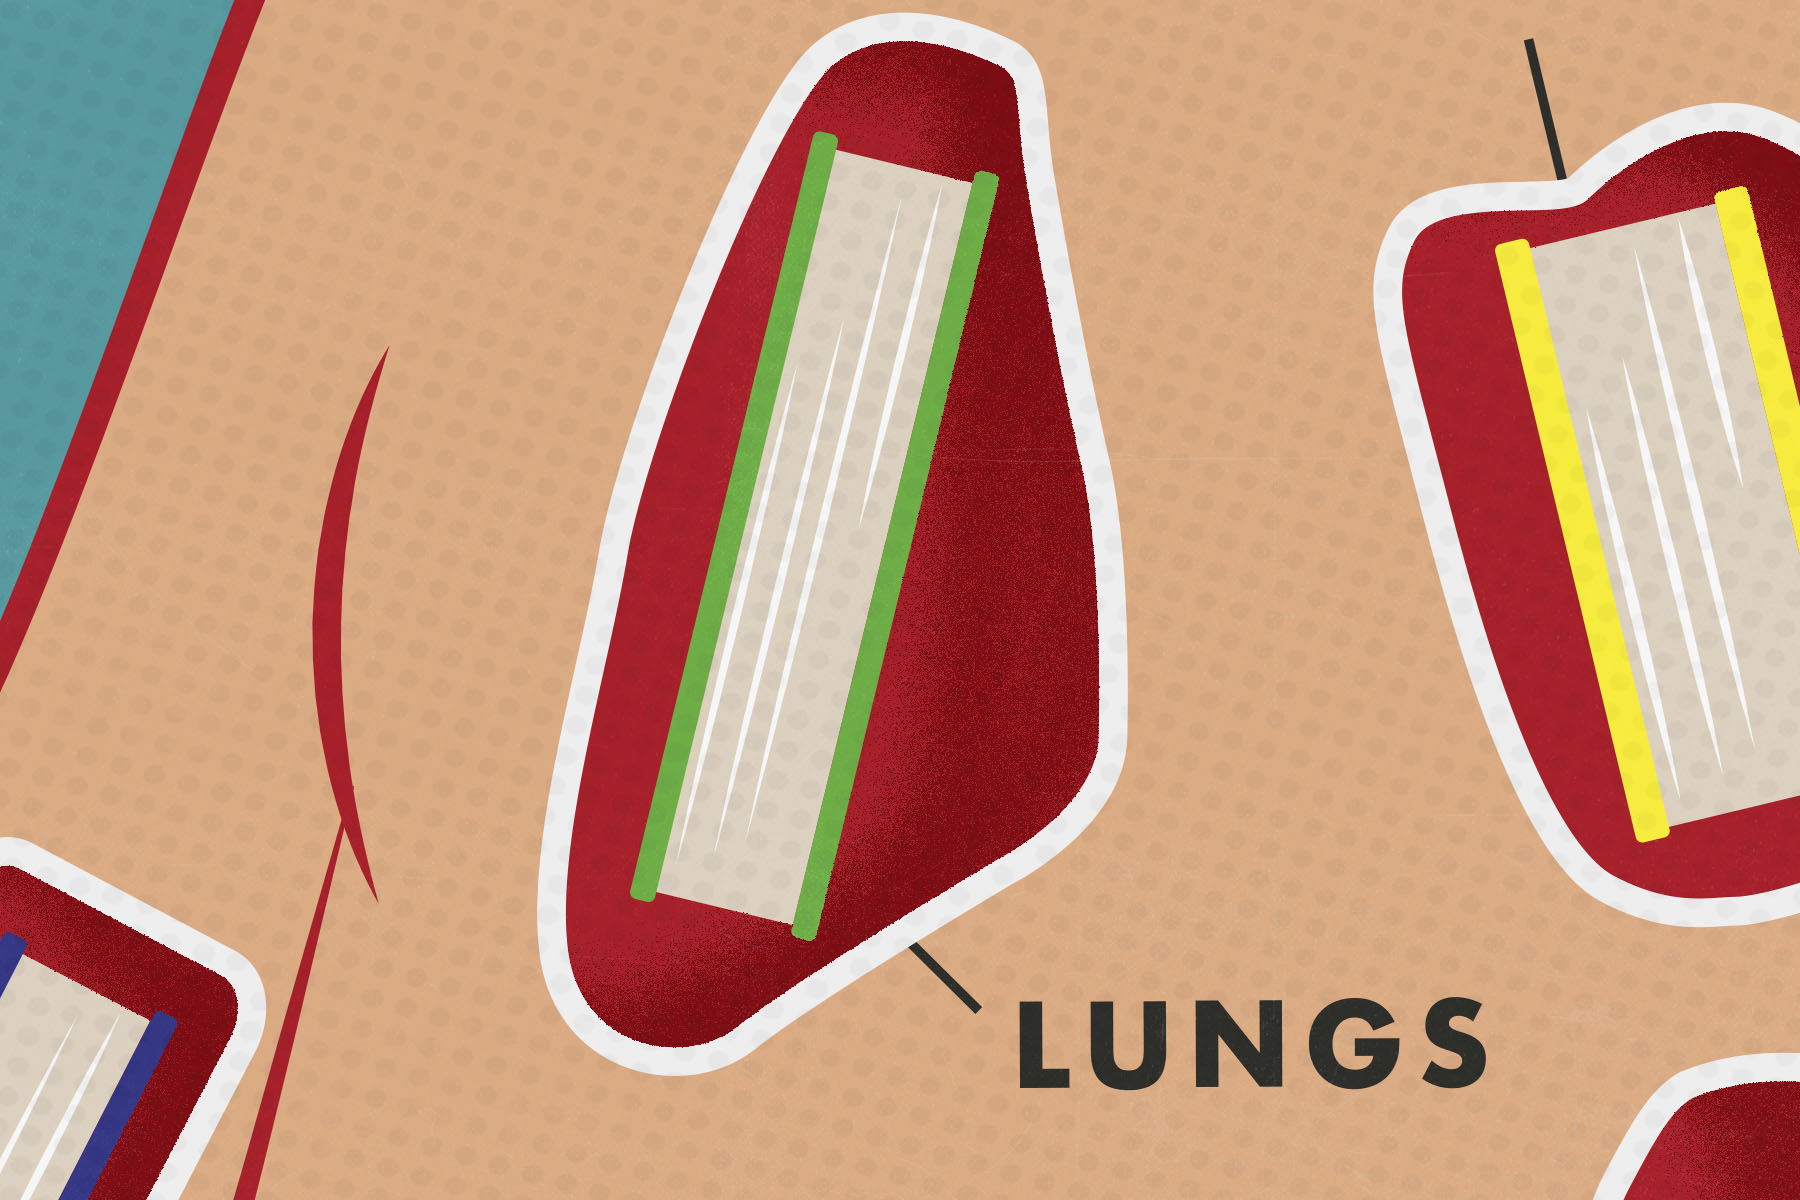 A boardgame-style illustration of books in the place of lungs